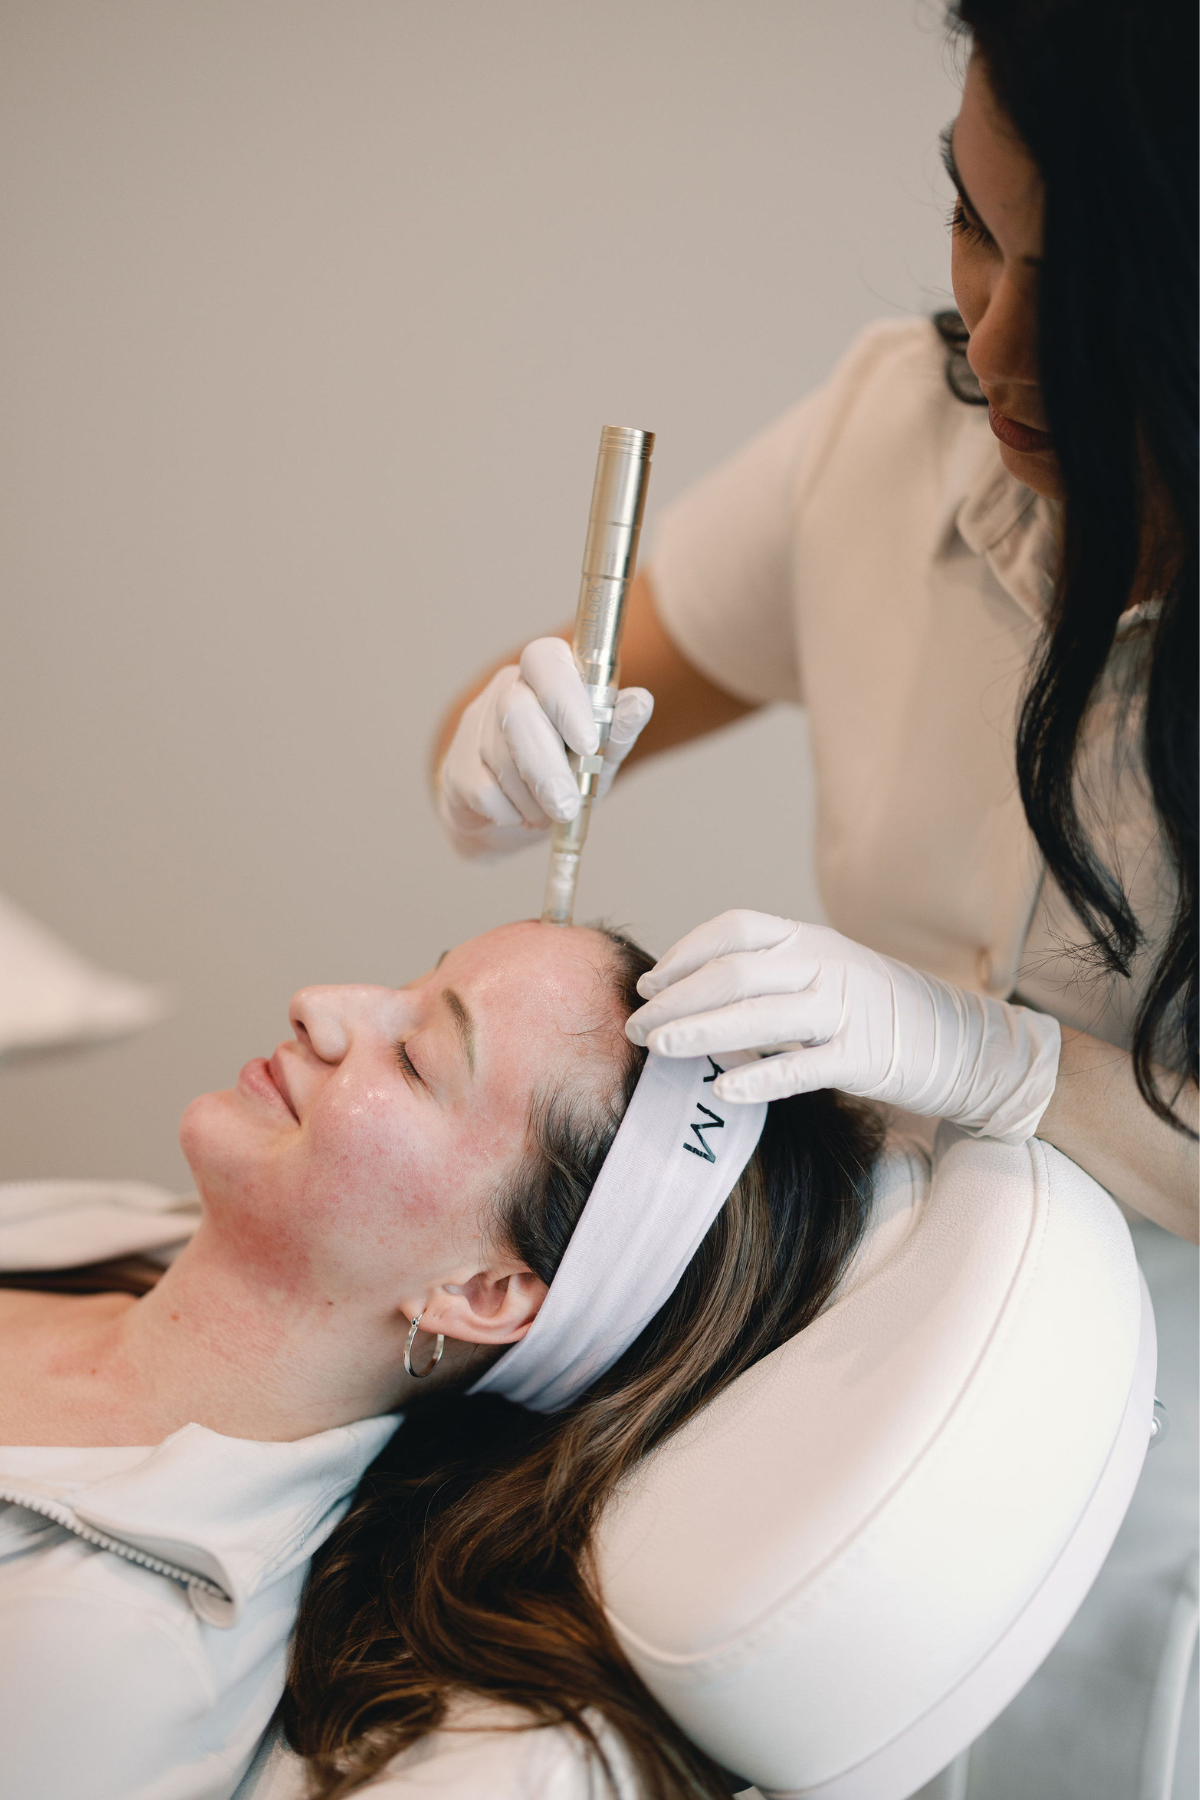 What to Expect During Your Microneedling Treatment